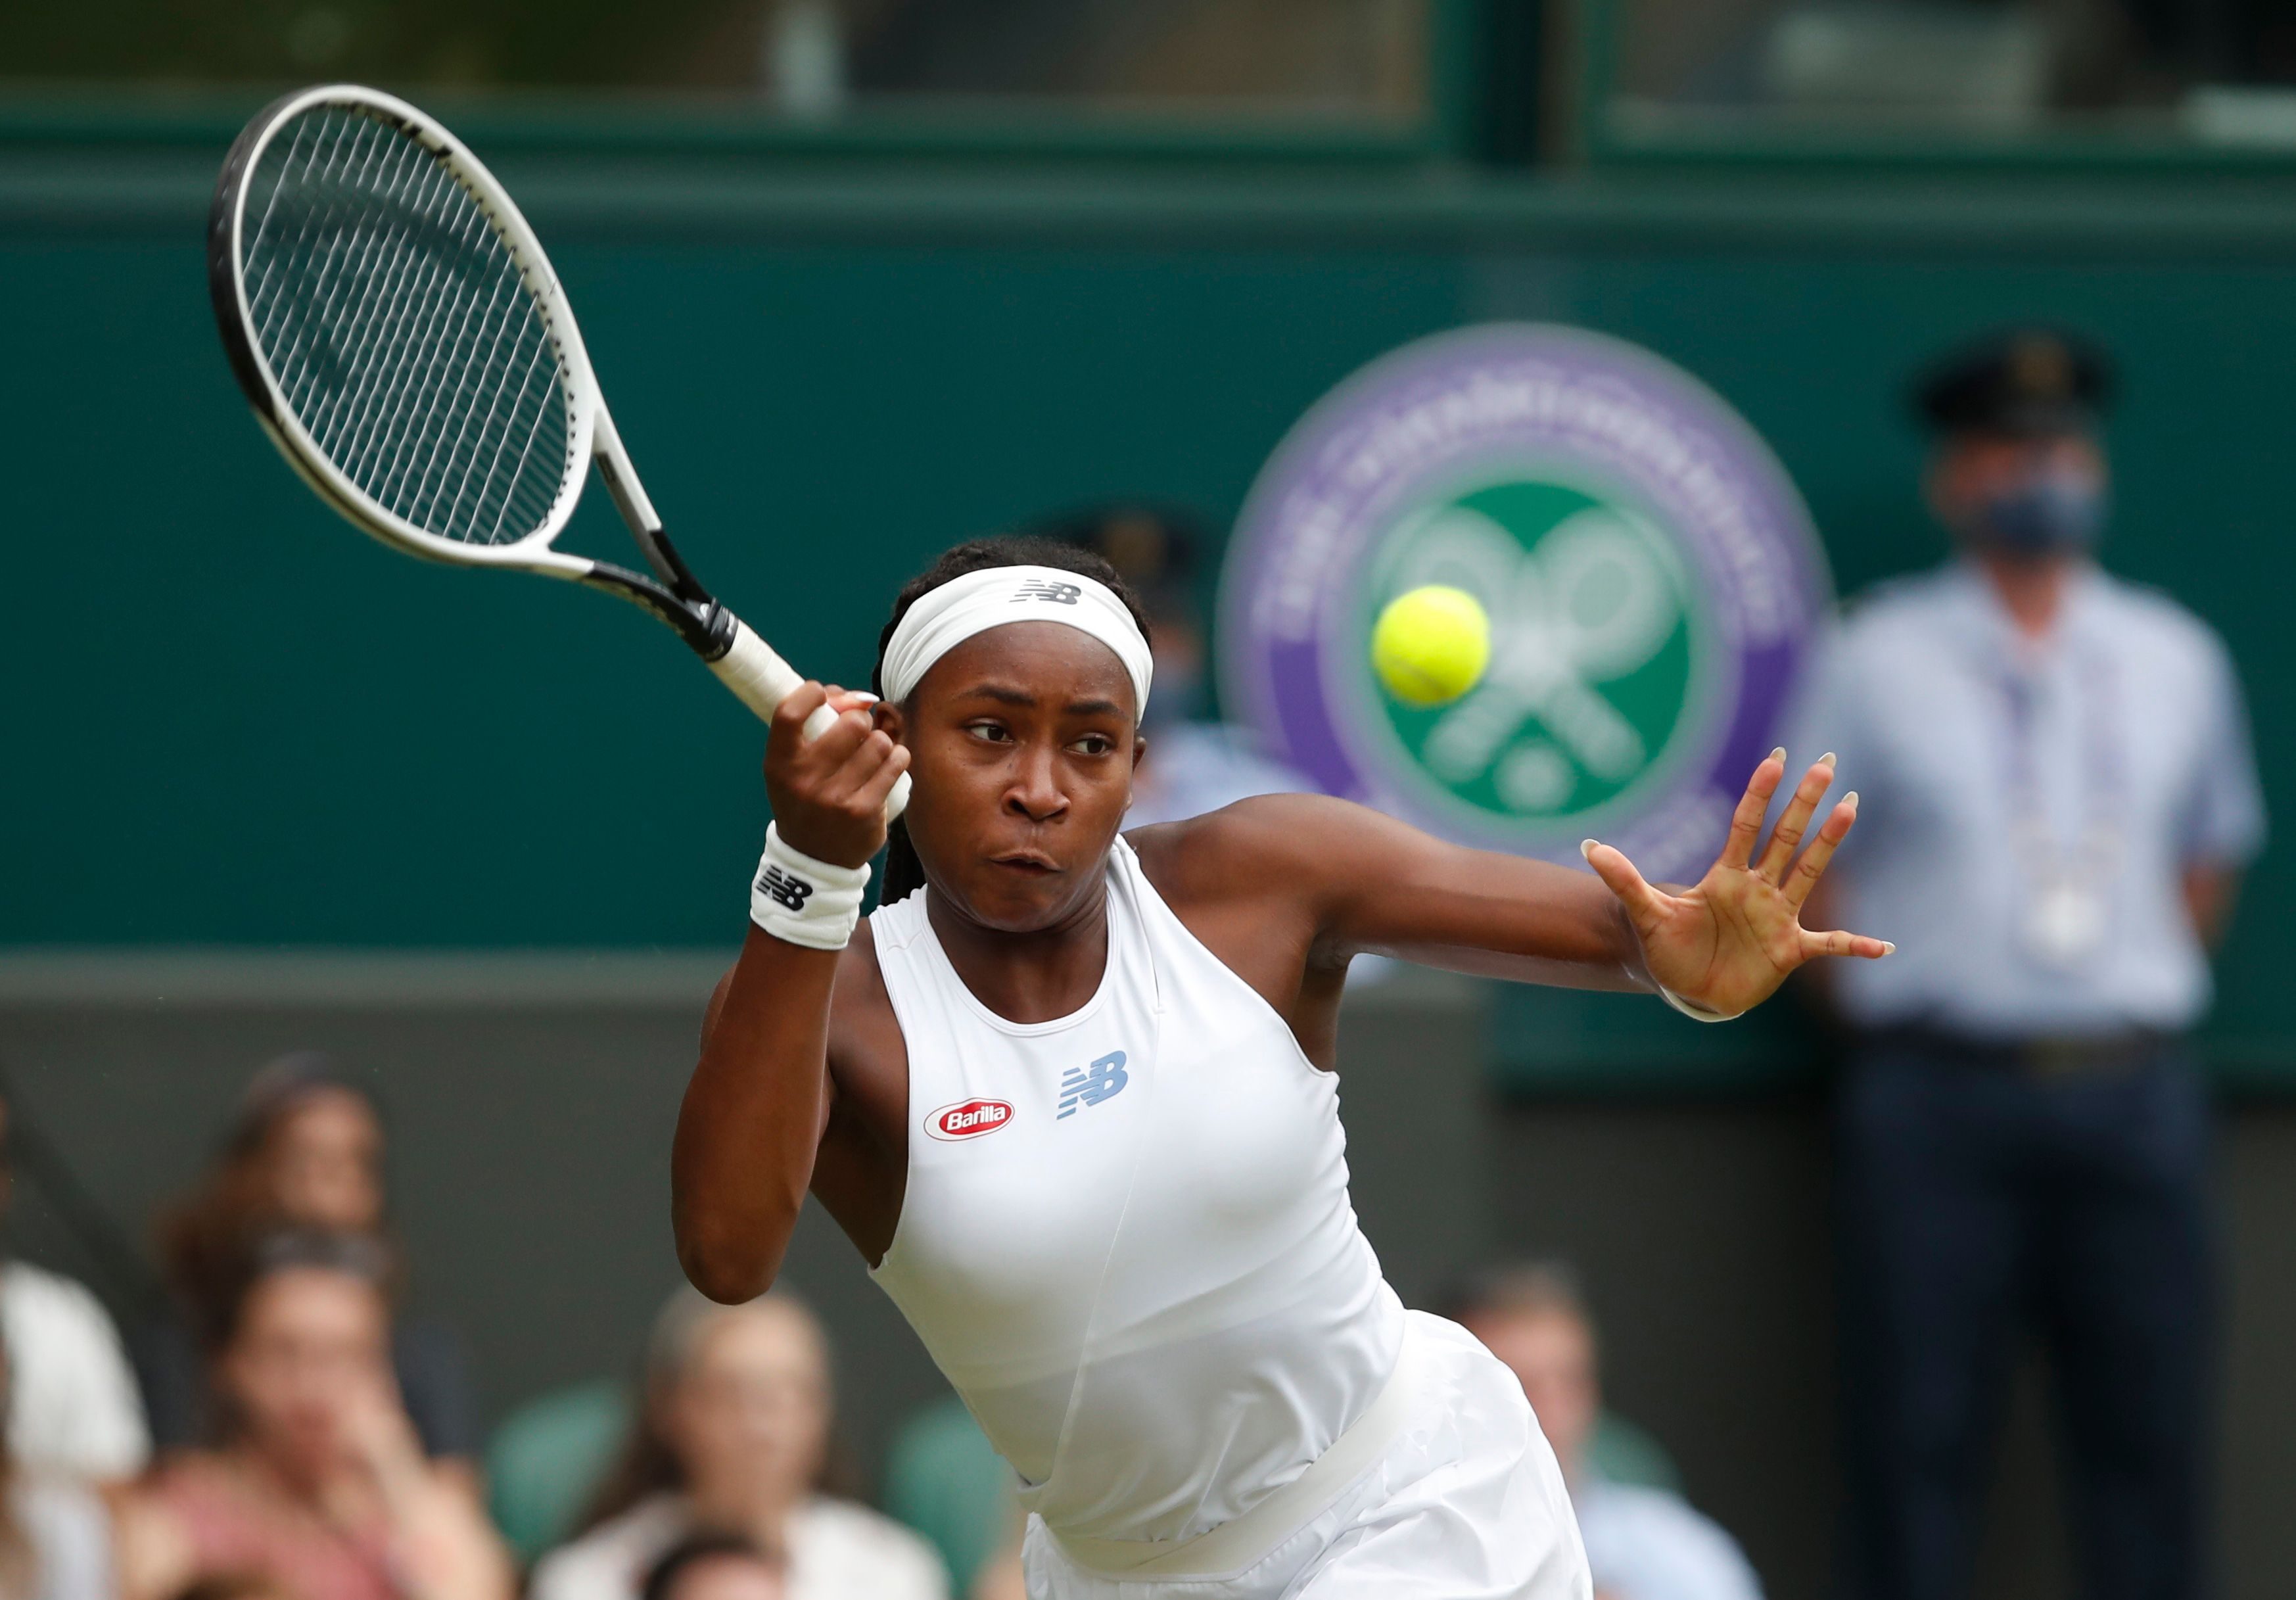 Coco Gauff tests positive for COVID-19, to miss Tokyo Games